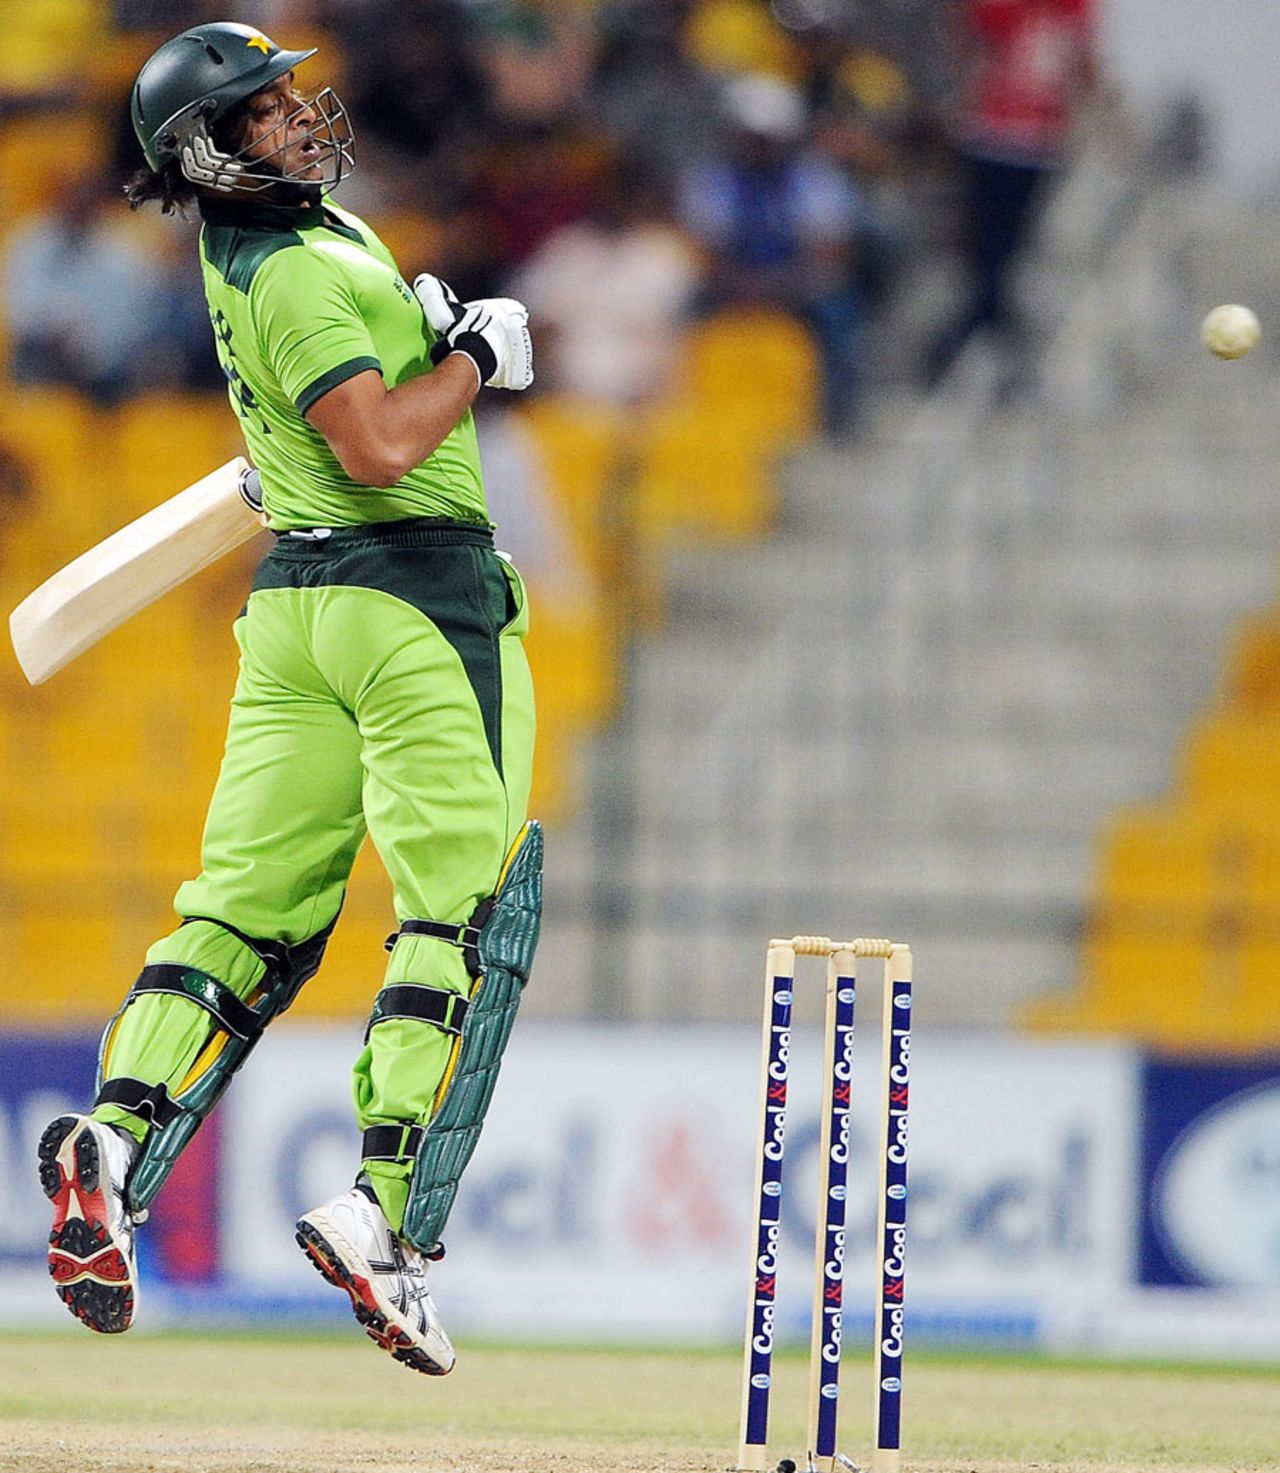 Shoaib Akhtar weaves out of the way of a pacy bouncer, Pakistan v South Africa, 1st ODI, Abu Dhabi, October 29, 2010